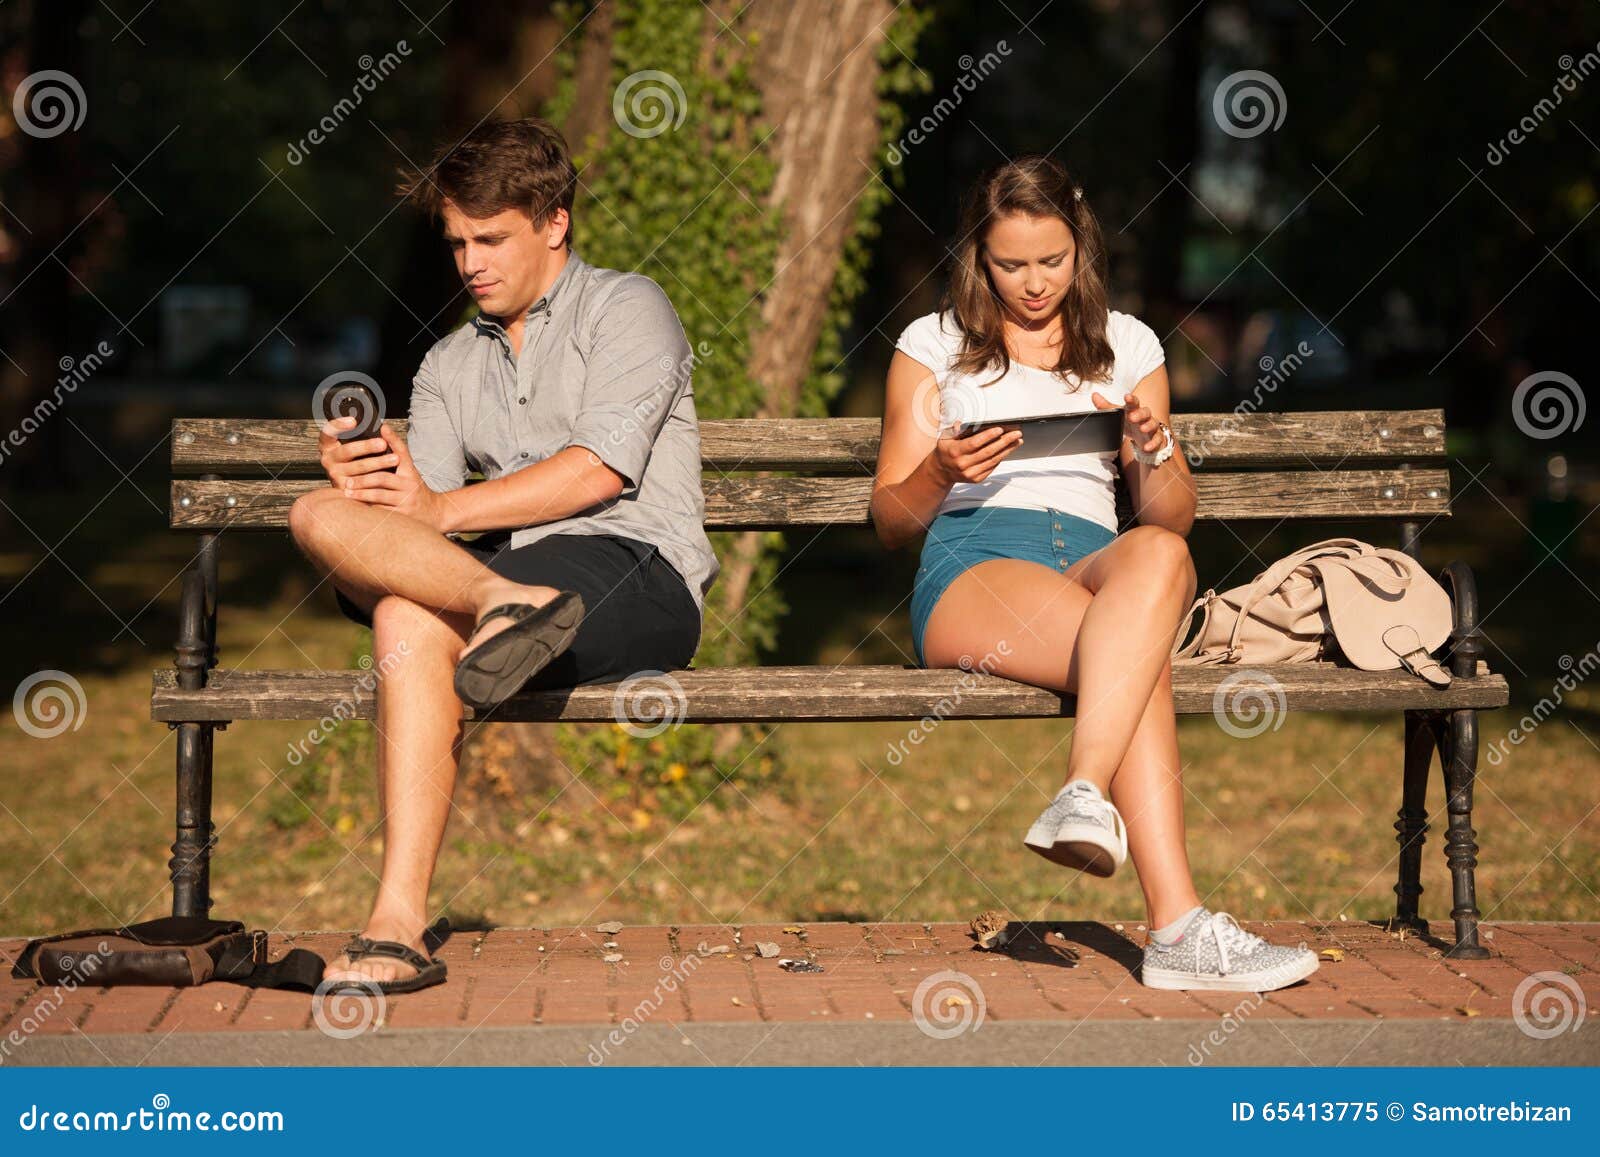 355 Distracted Girlfriend Stock Photos - Free & Royalty-Free Stock